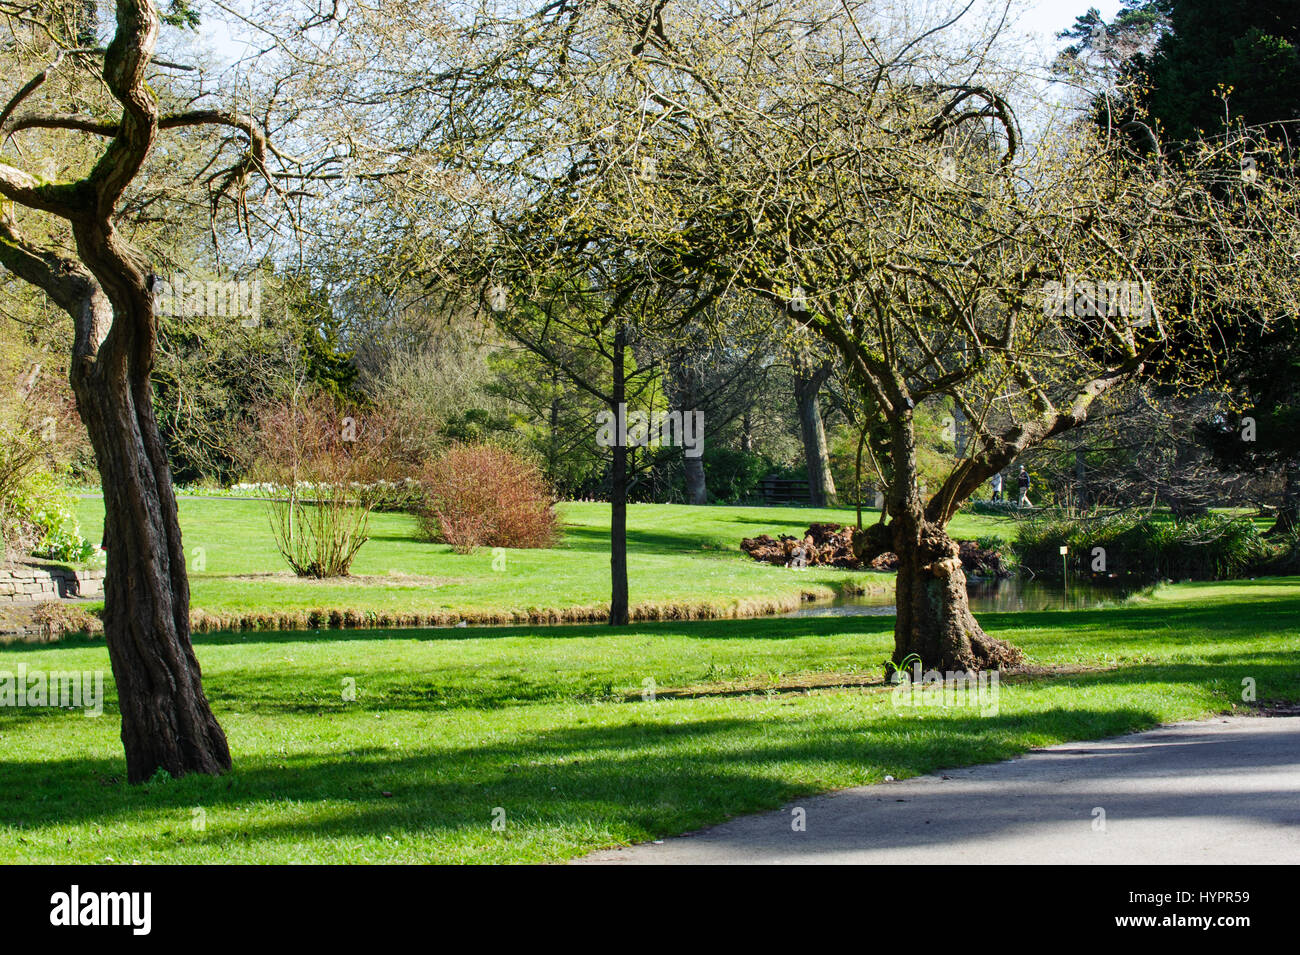 Dublin, Ireland - 15 March, 2017: Beautiful landscape in spring time in The National Botanic Gardens on March 15, 2017 in Dublin Stock Photo